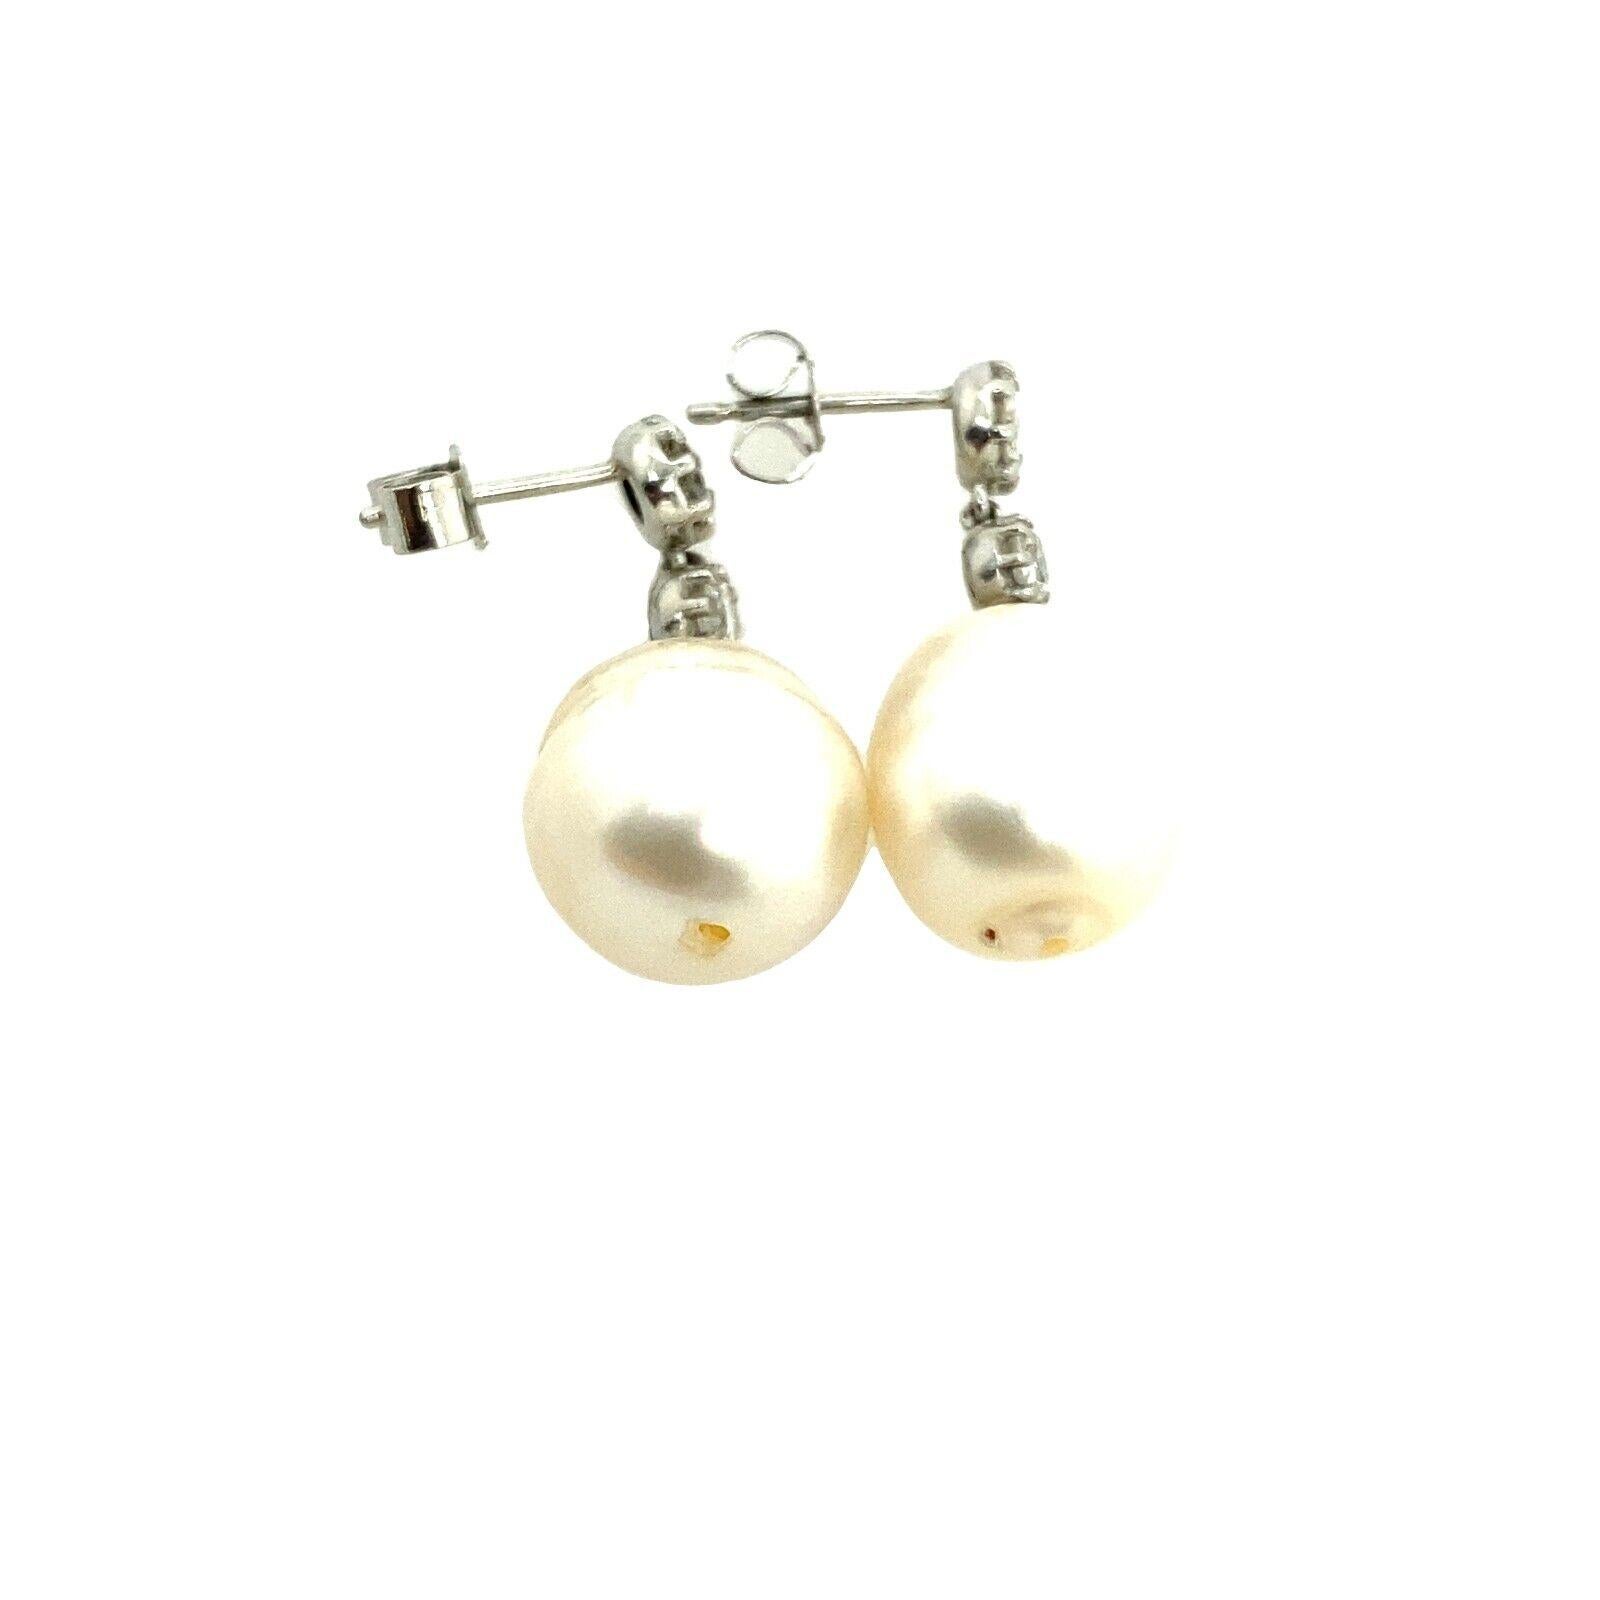 This is a pair of Victorian Cut Diamond drop earrings set with 0.65ct Diamonds and 2 cultured Pearls. This pair is a perfect choice for any occasion to wear as it is stylish and comfortable. It is crafted from Platinum with peg and butterfly